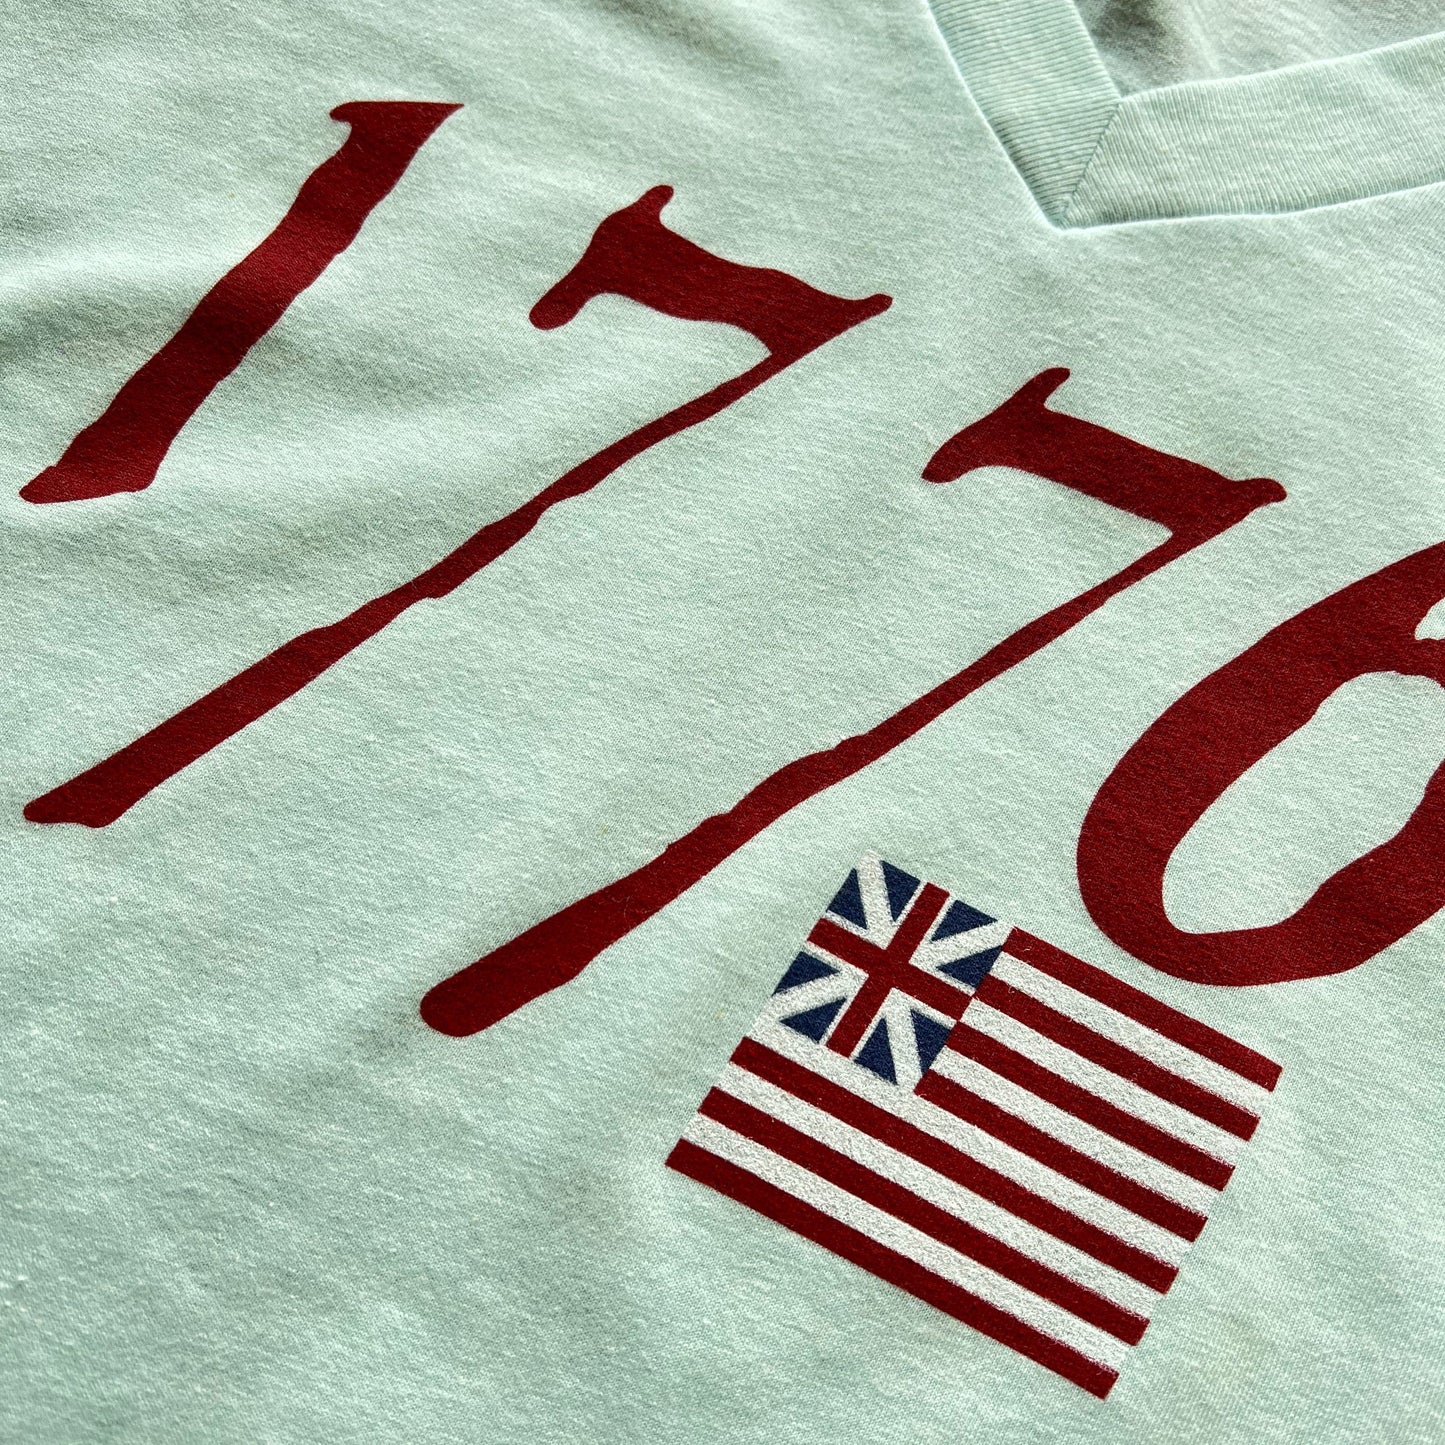 Close-up of "We hold these truths - July 4, 1776” v-neck shirt from The History List store in Light blue